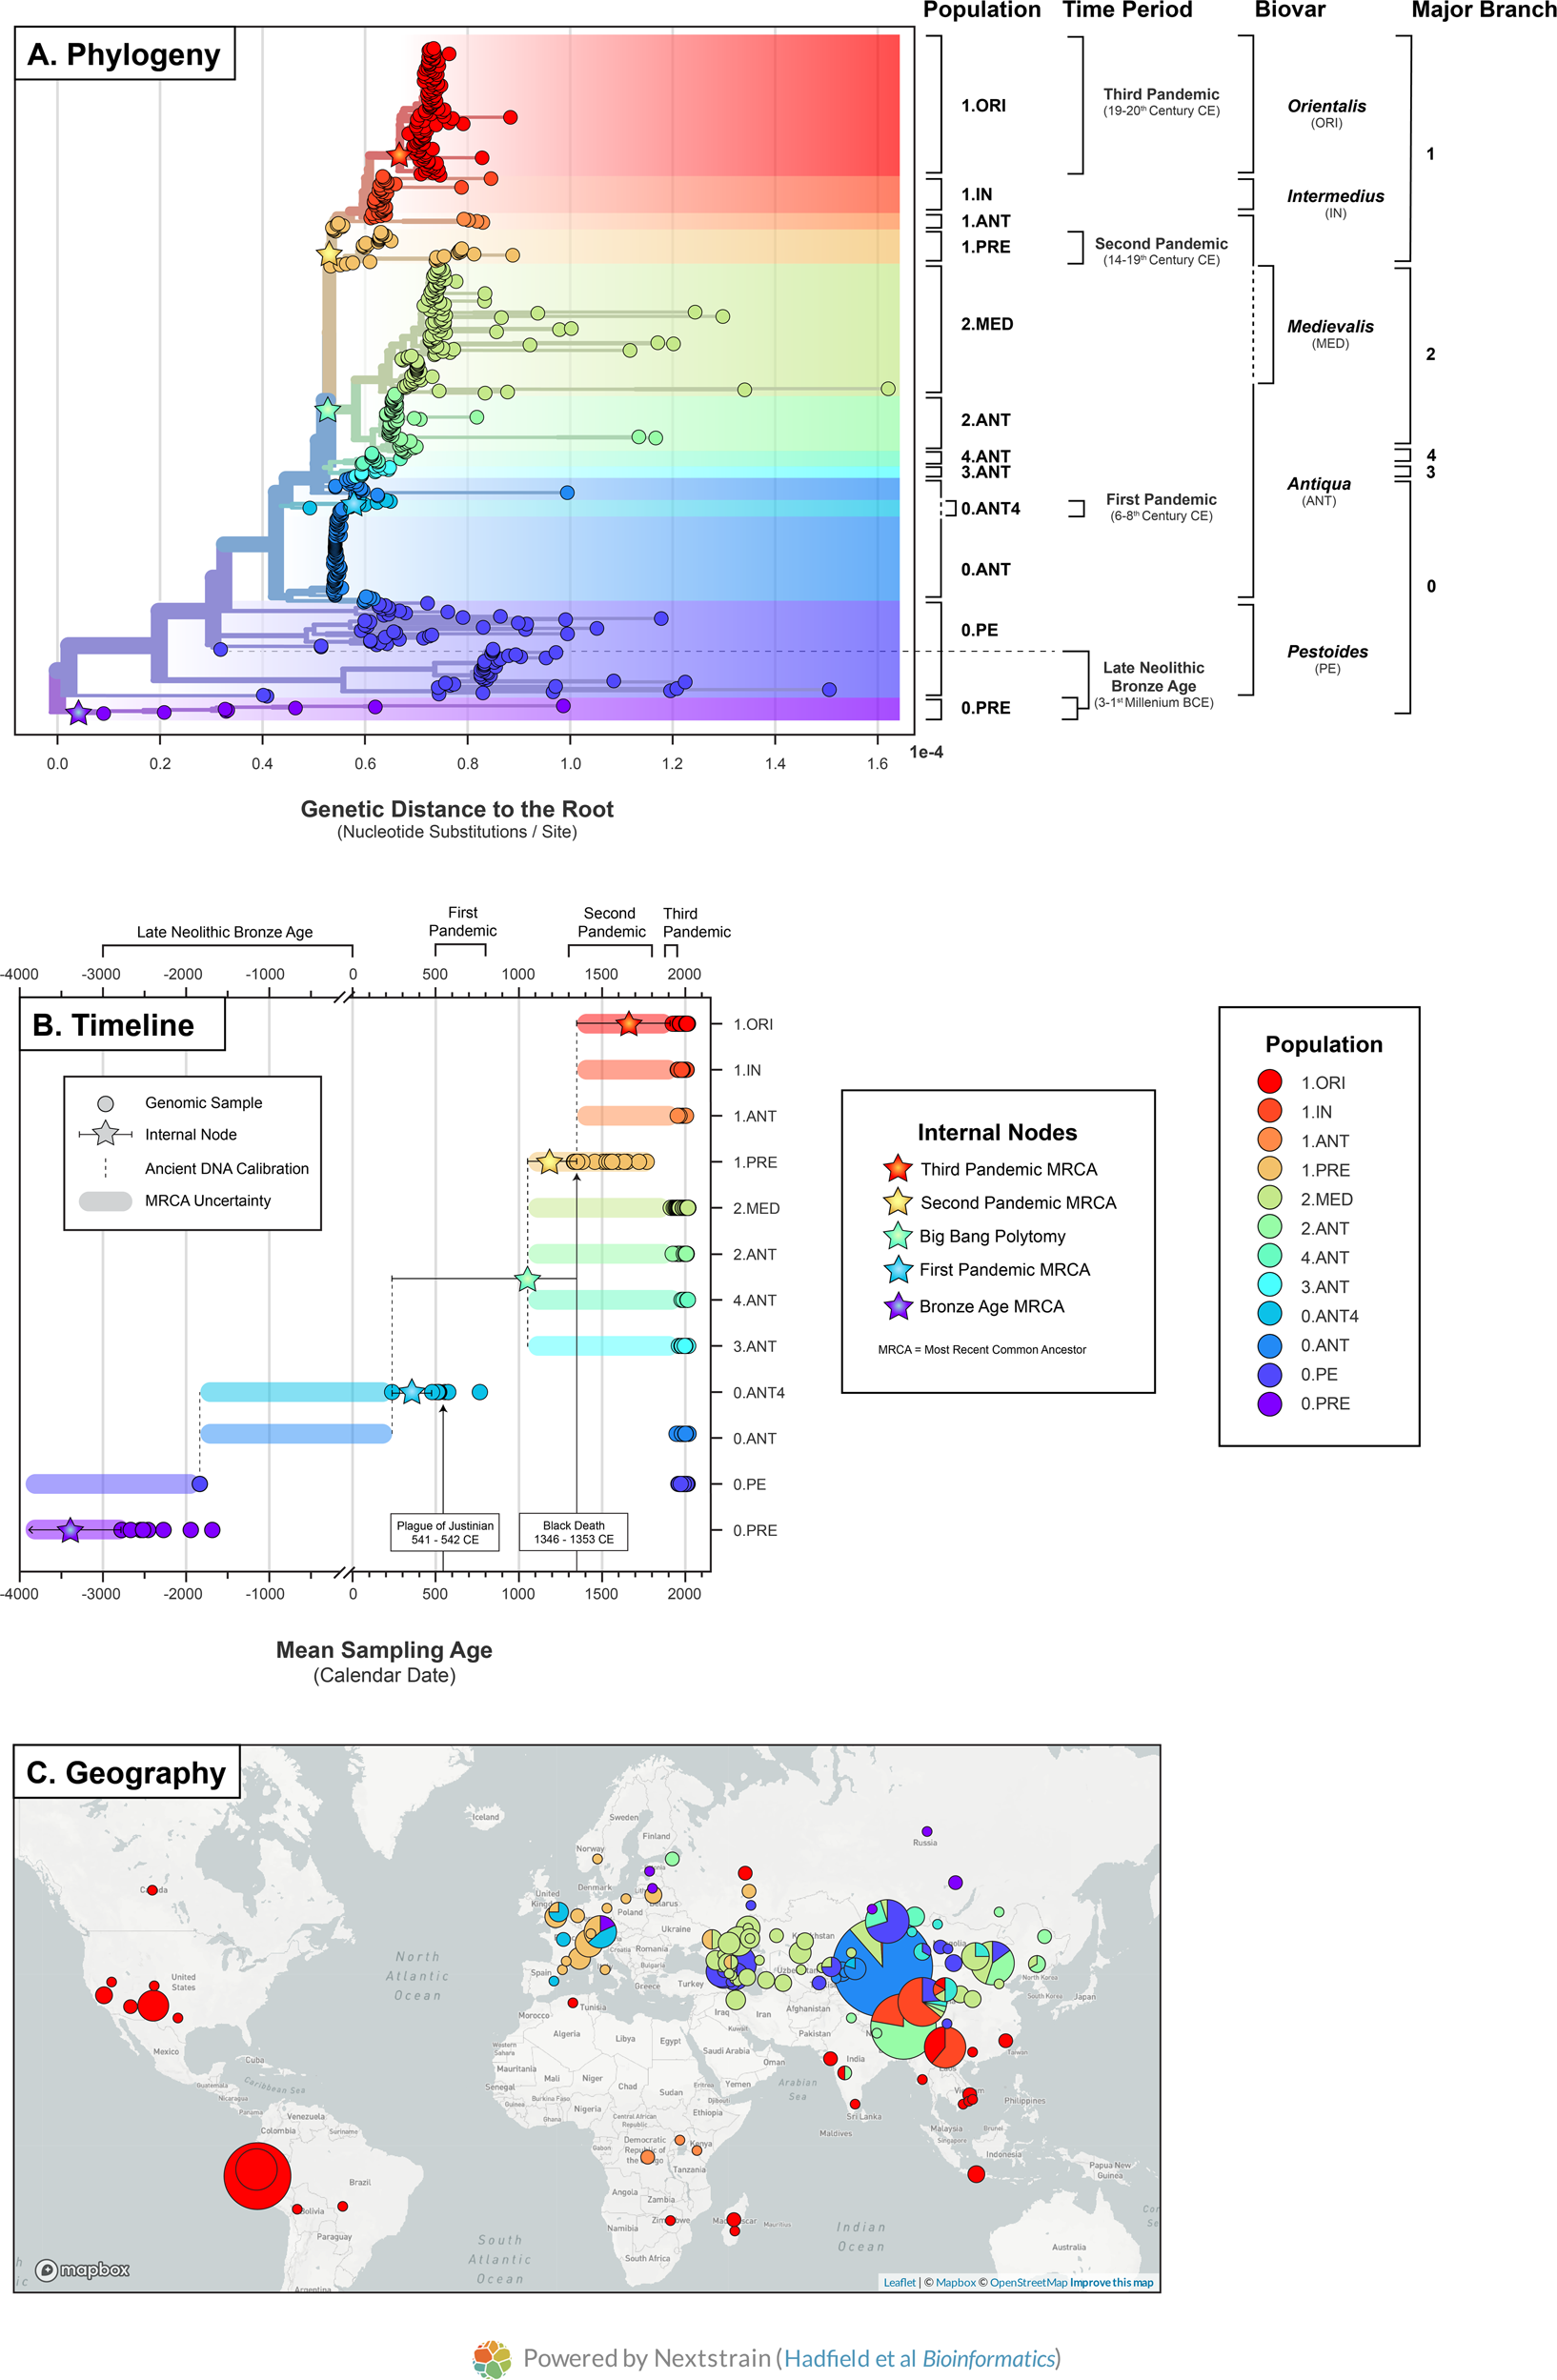 Plagued by a cryptic clock: insight and issues from the global phylogeny of  Yersinia pestis | Communications Biology